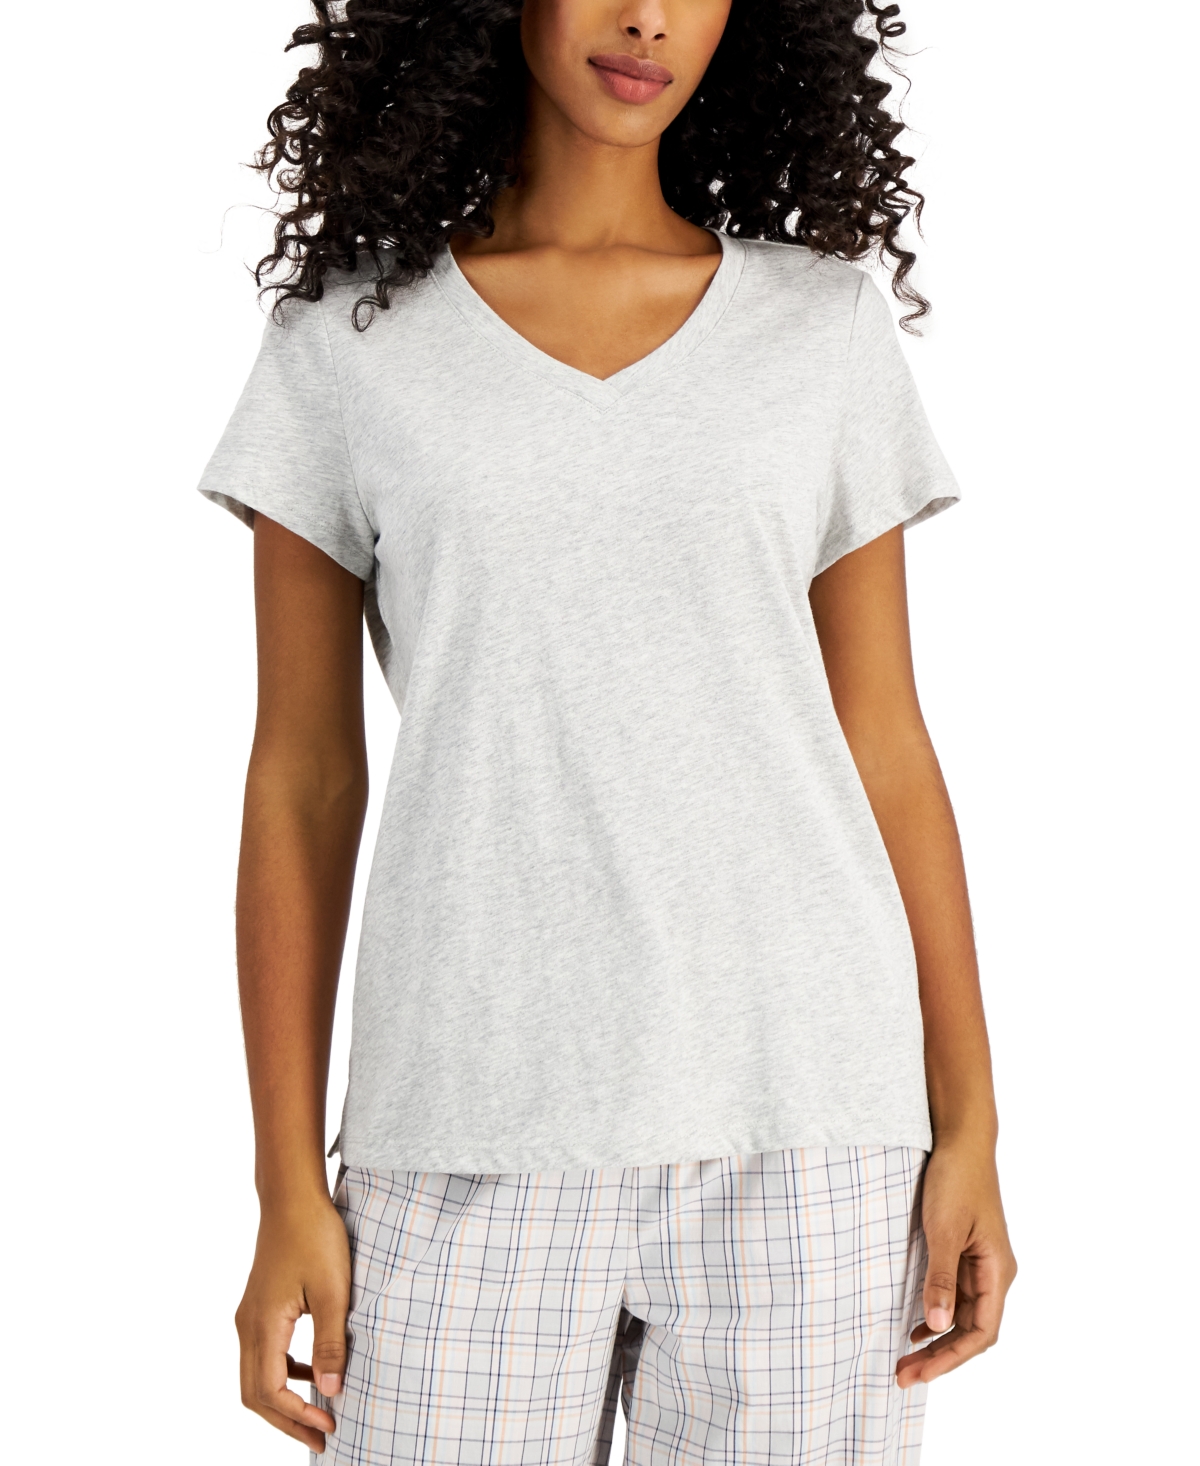 Charter Club Everyday Cotton V-Neck Pajama T-Shirt, Created for Macy's